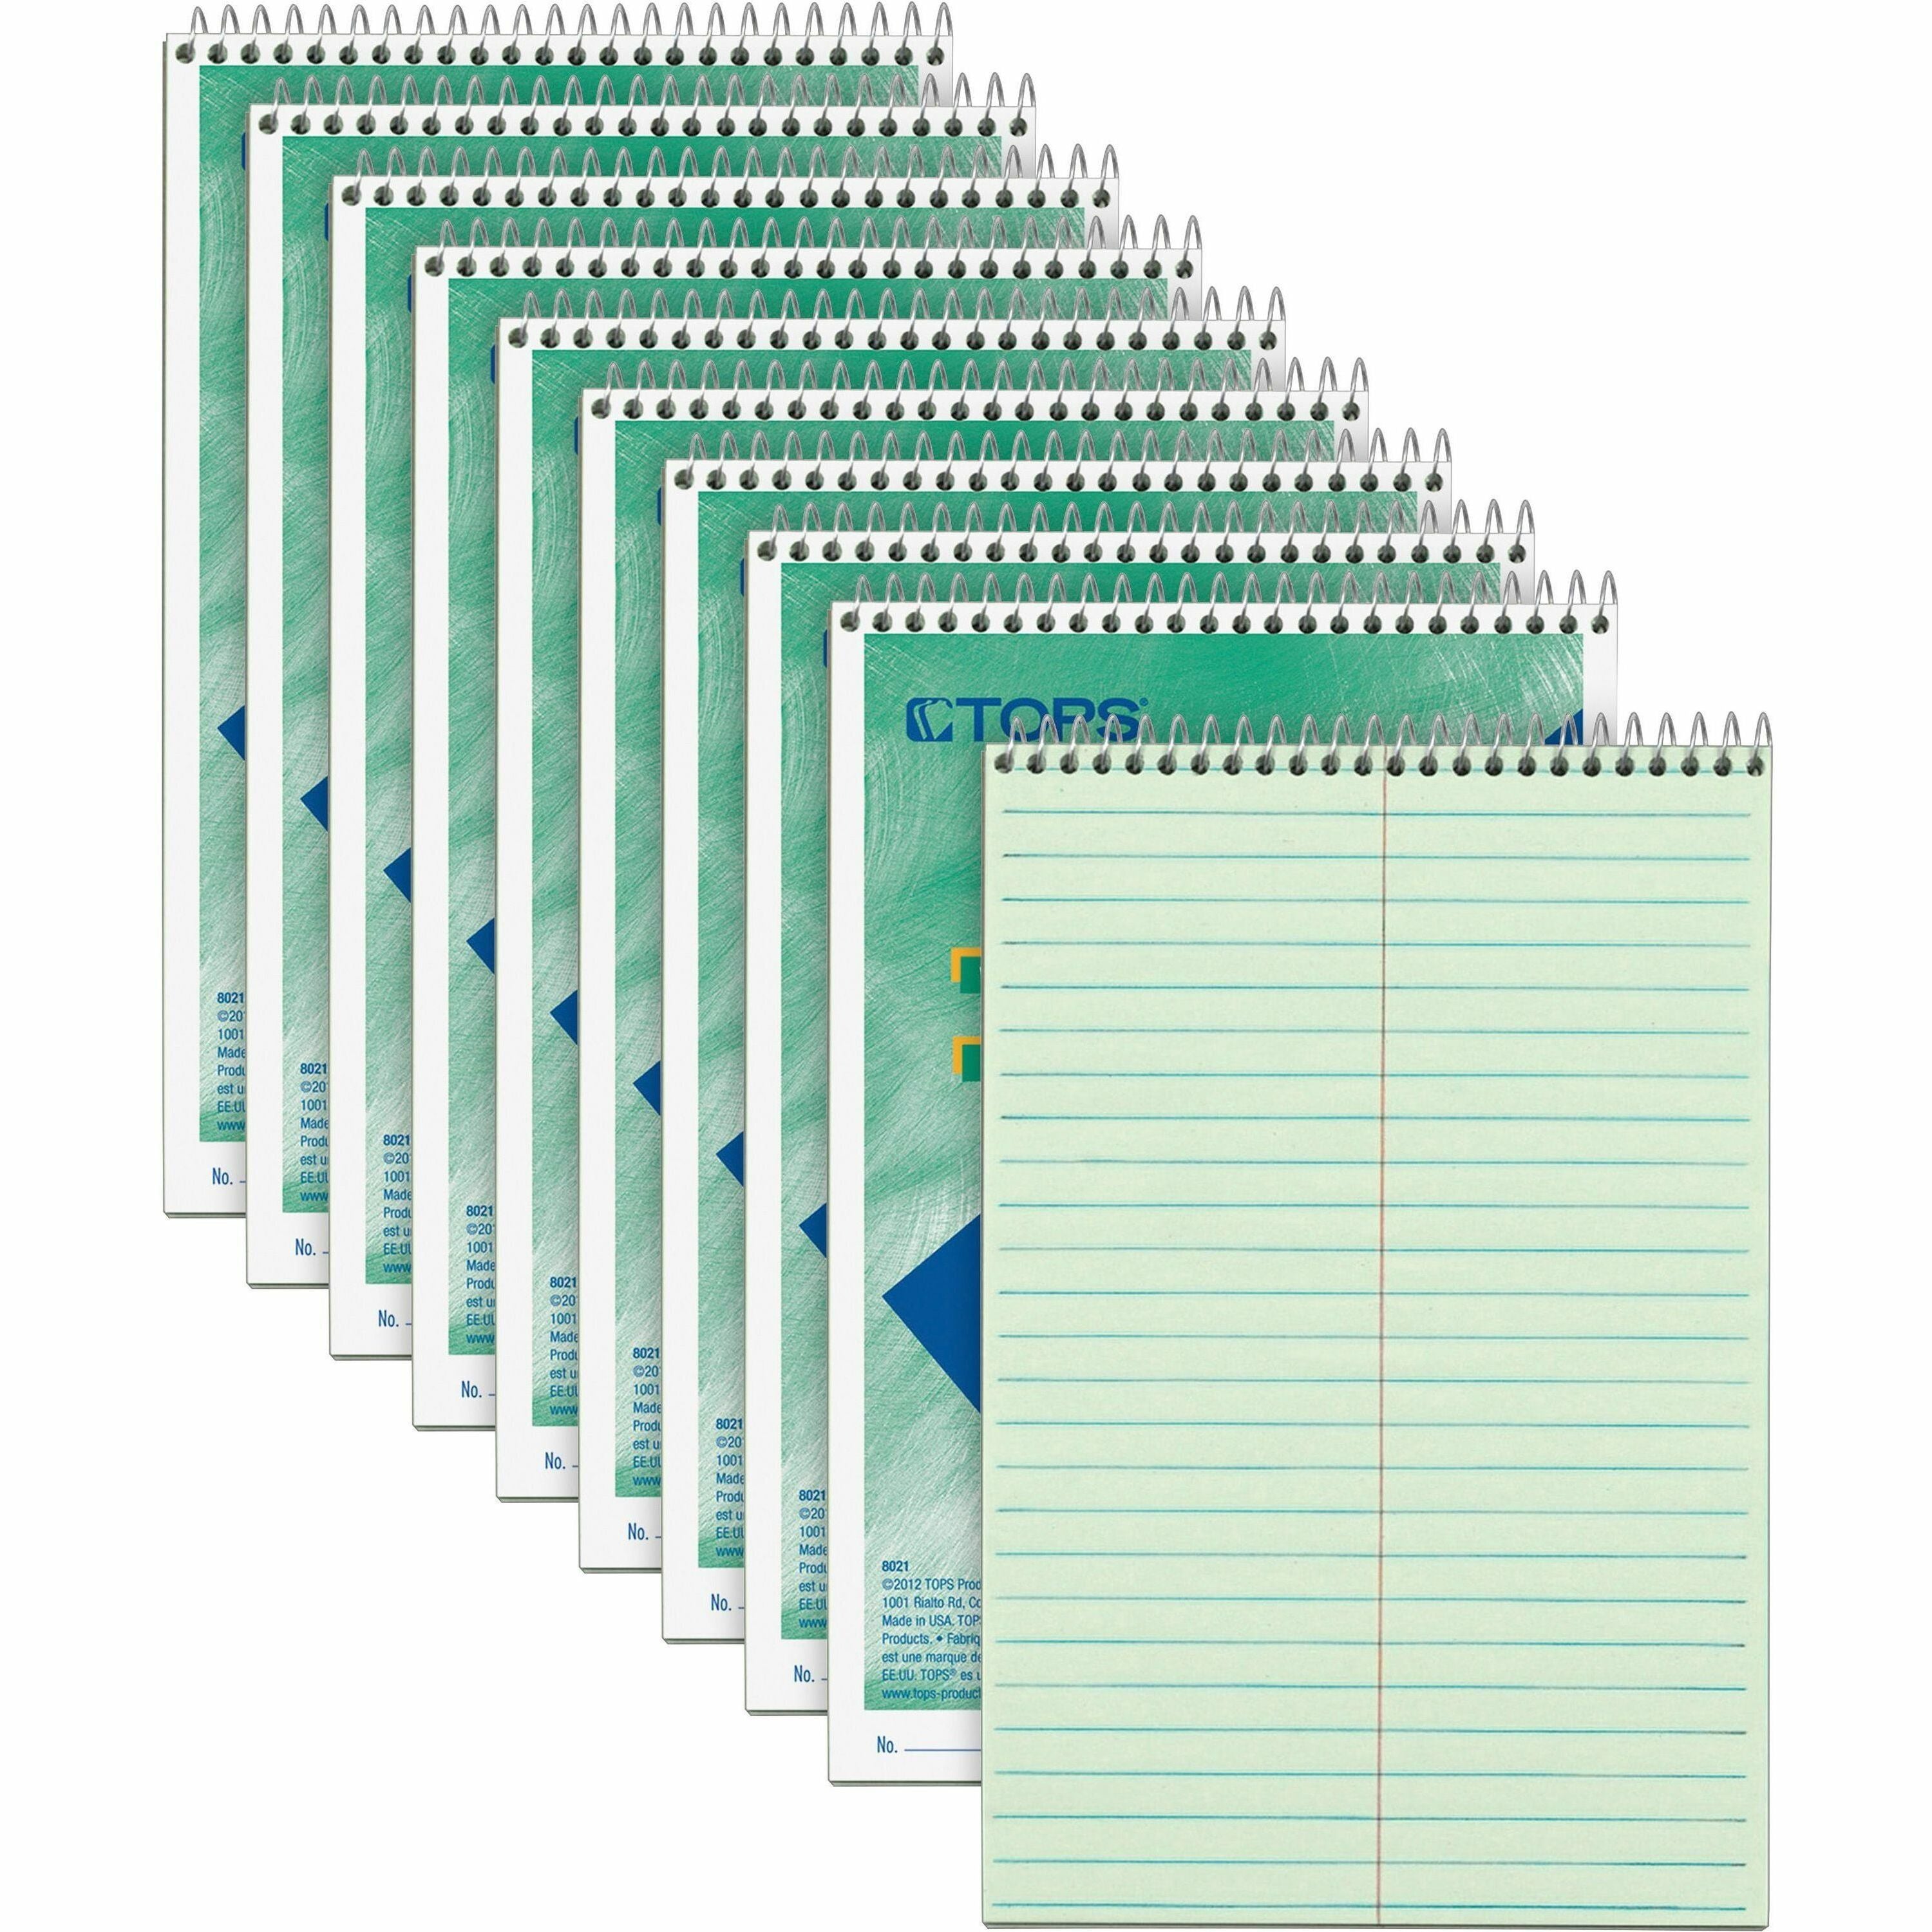 TOPS Steno Books - 80 Sheets - Wire Bound - Gregg Ruled Margin - 6" x 9" - Green Tint Paper - Snag Resistant, Acid-free, Heavyweight - 1 Dozen - 